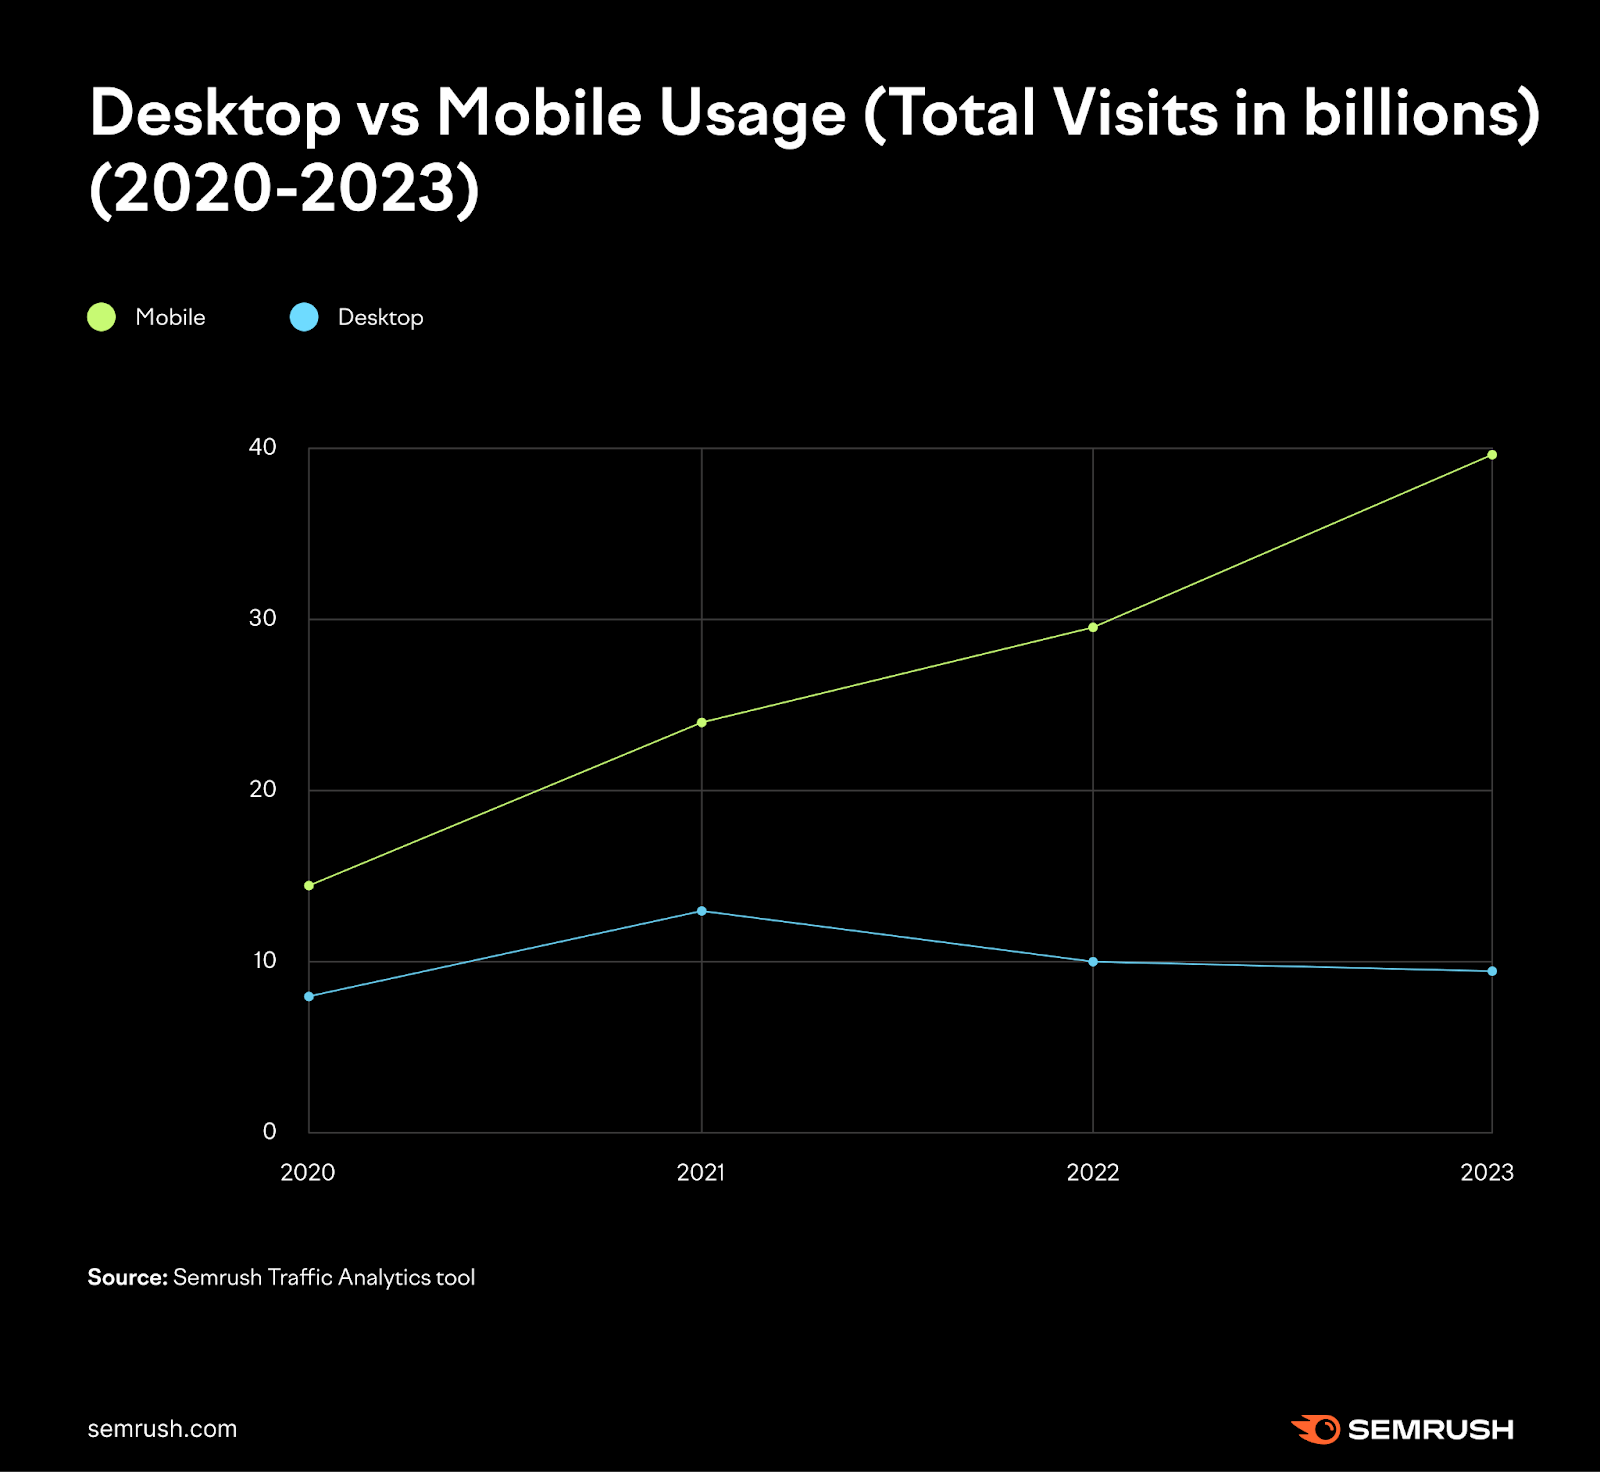 A graph showing desktop vs mobile usage from 2020 to 2023, using data from Traffic Analytics tool